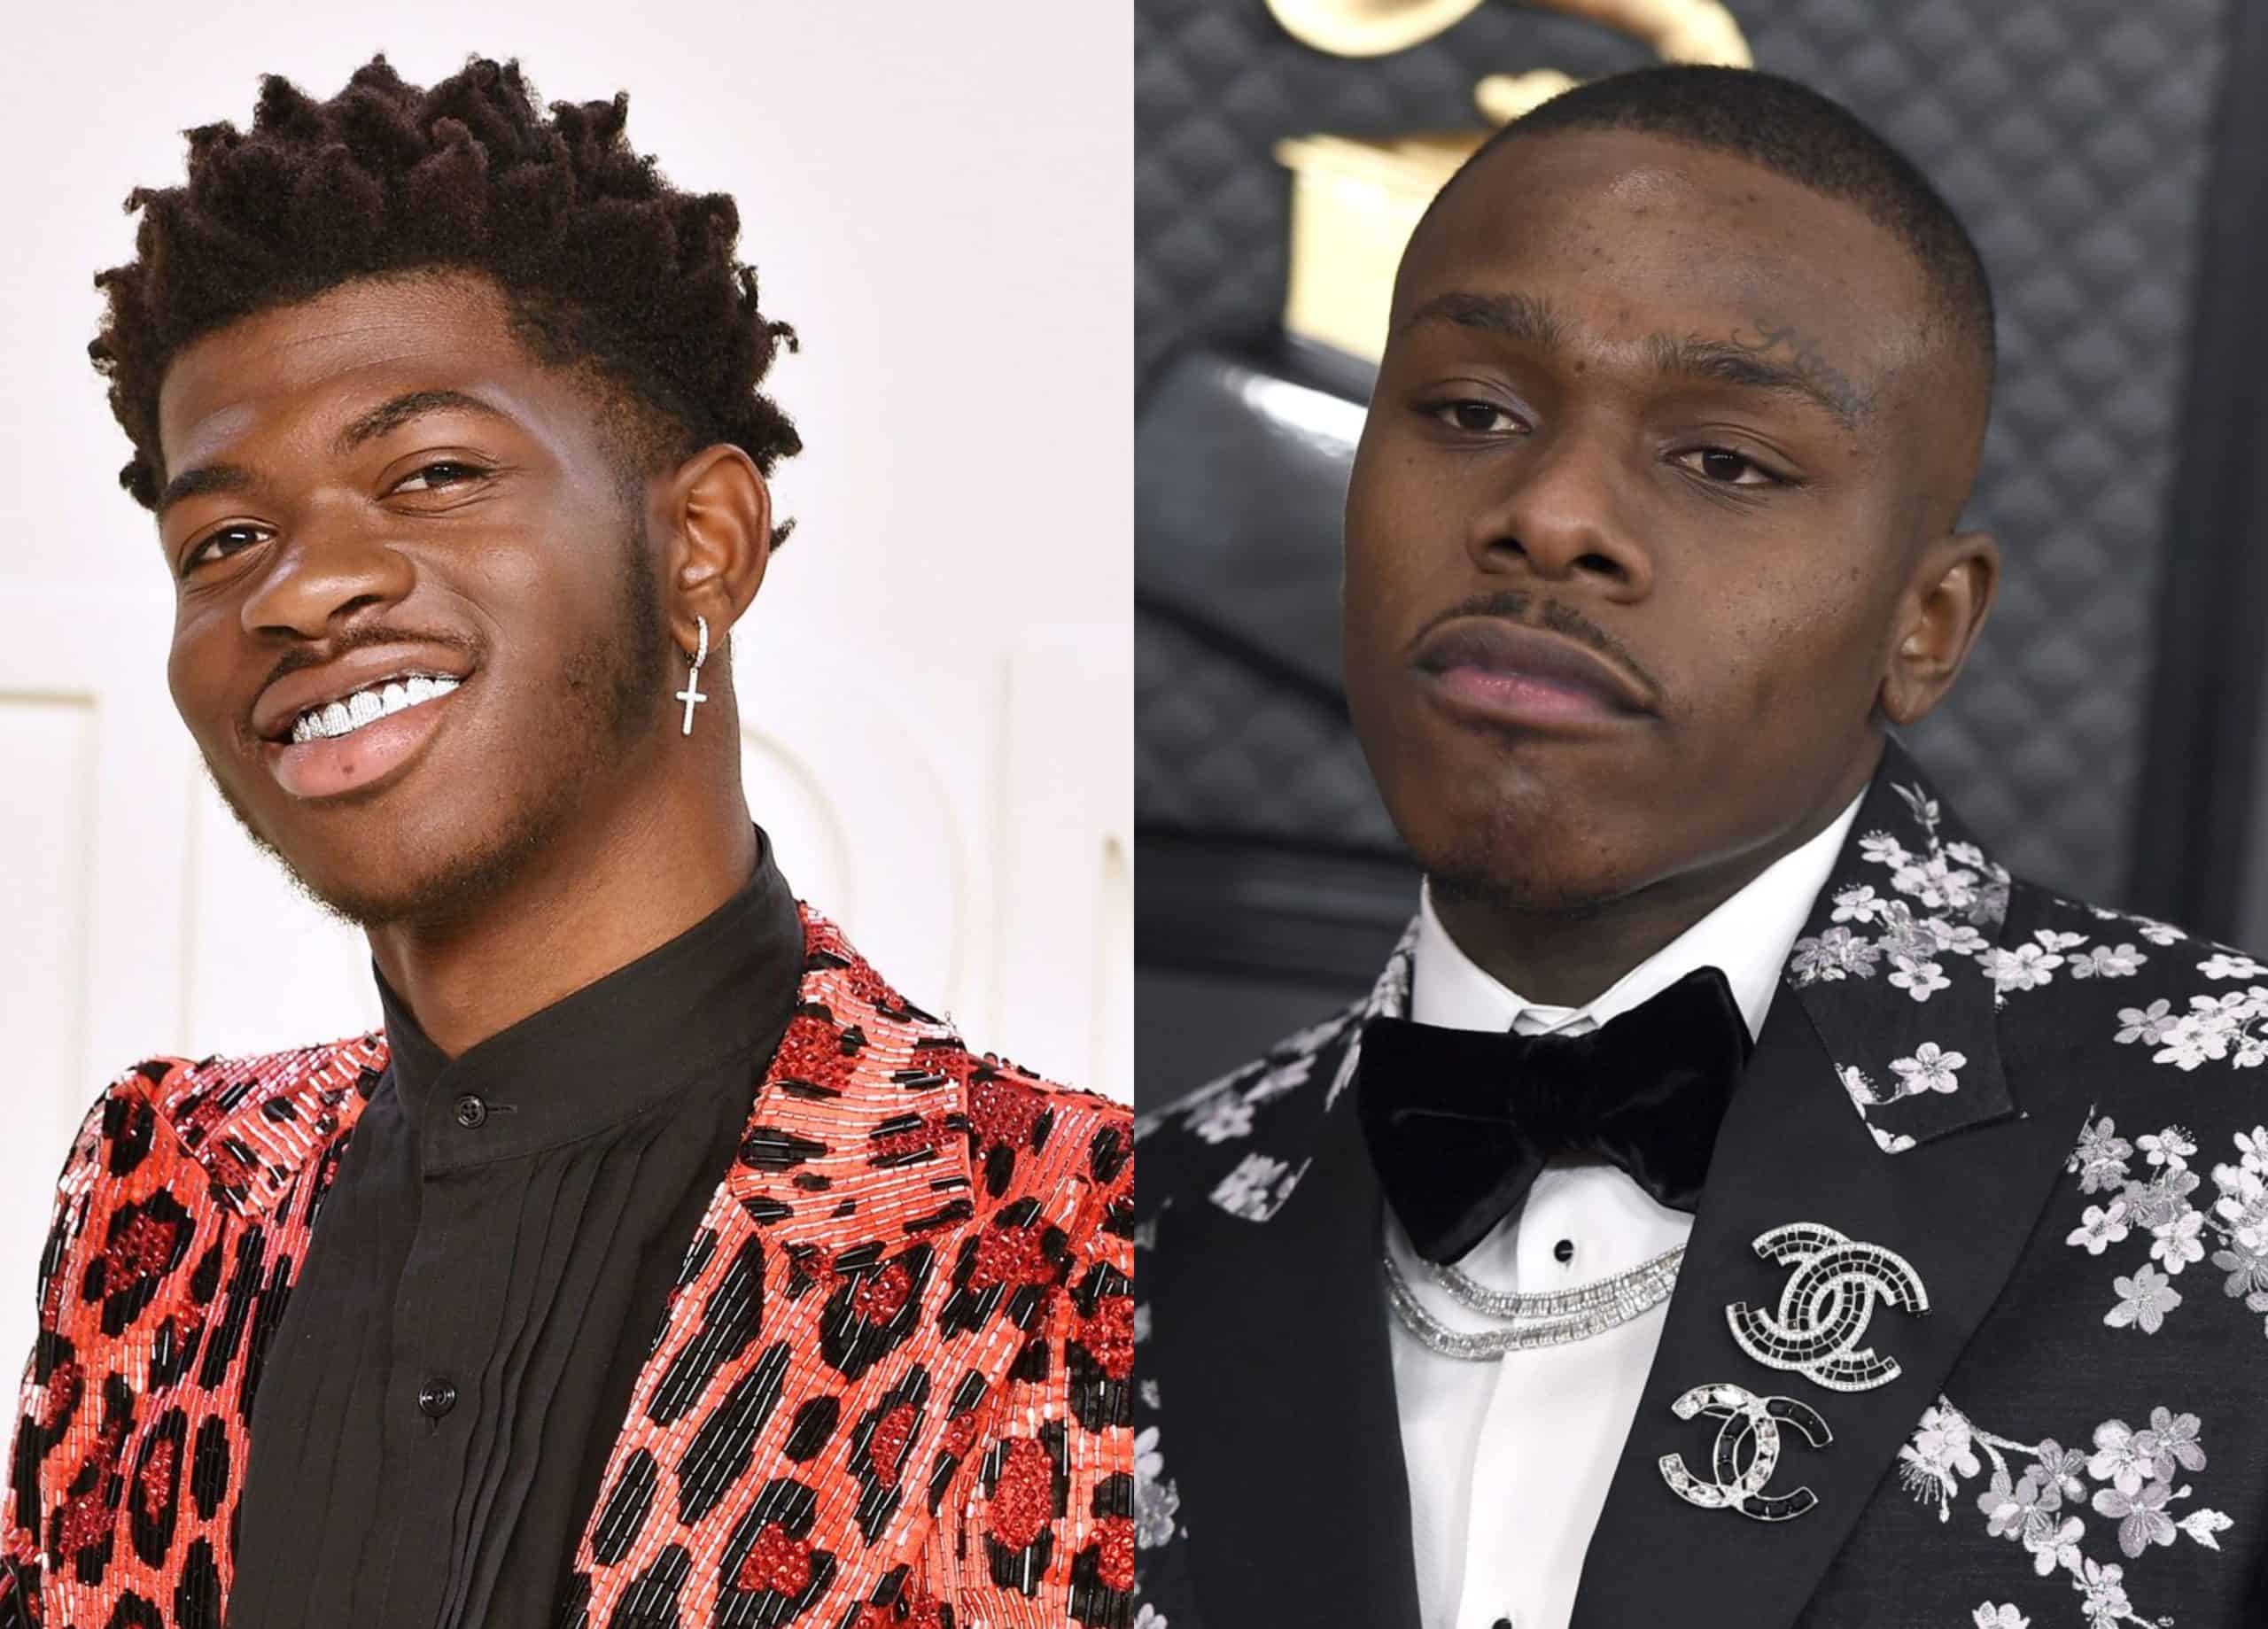 Lil Nas X Surpassed DaBaby To Become Most Streamed Male Rapper on Spotify